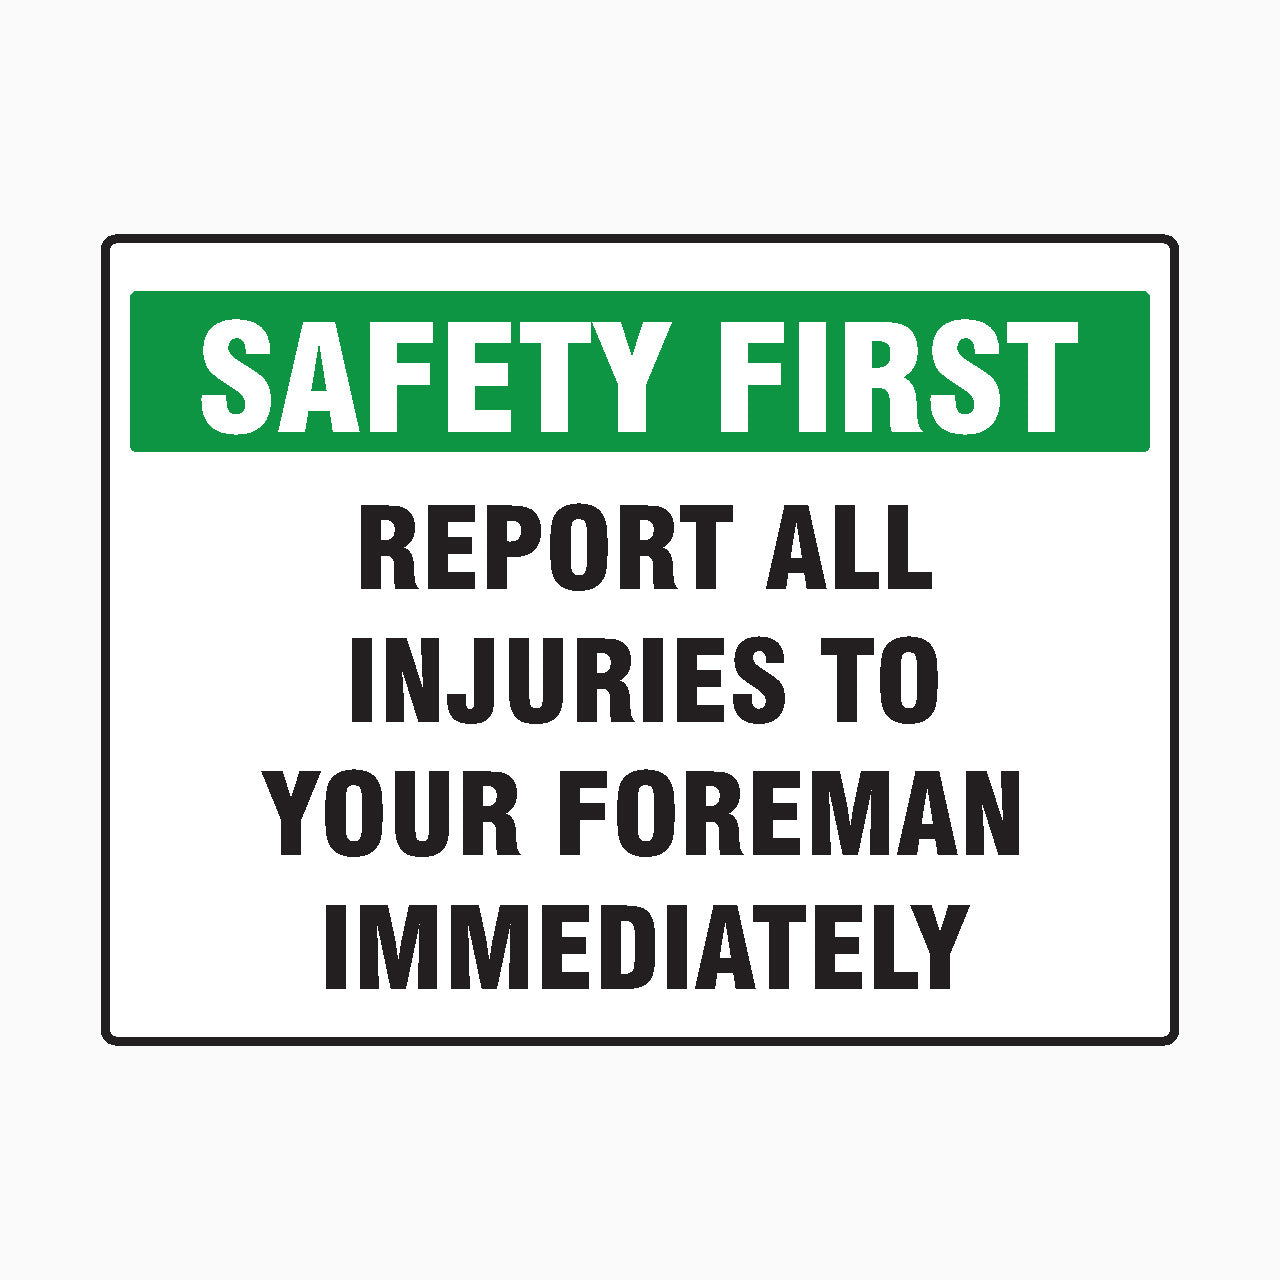 SAFETY FIRST - REPORT ALL INJURIES TO YOUR FOREMAN IMMEDIATELY SIGN